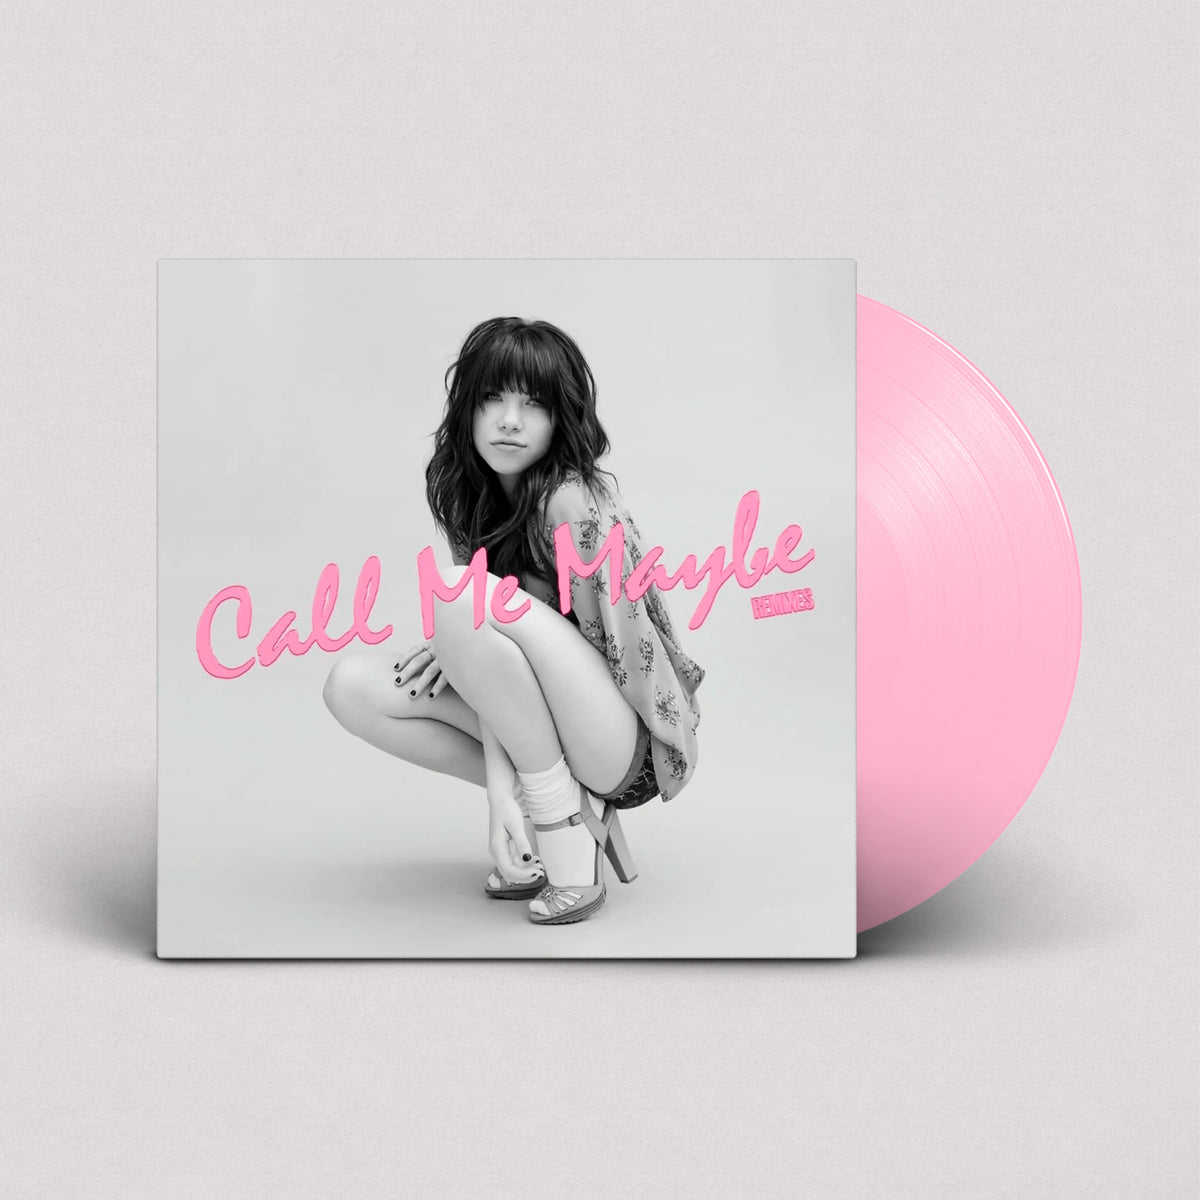 Carly Rae Jepsen – Call Me Maybe "Remixes" (Pink, Vinilo)